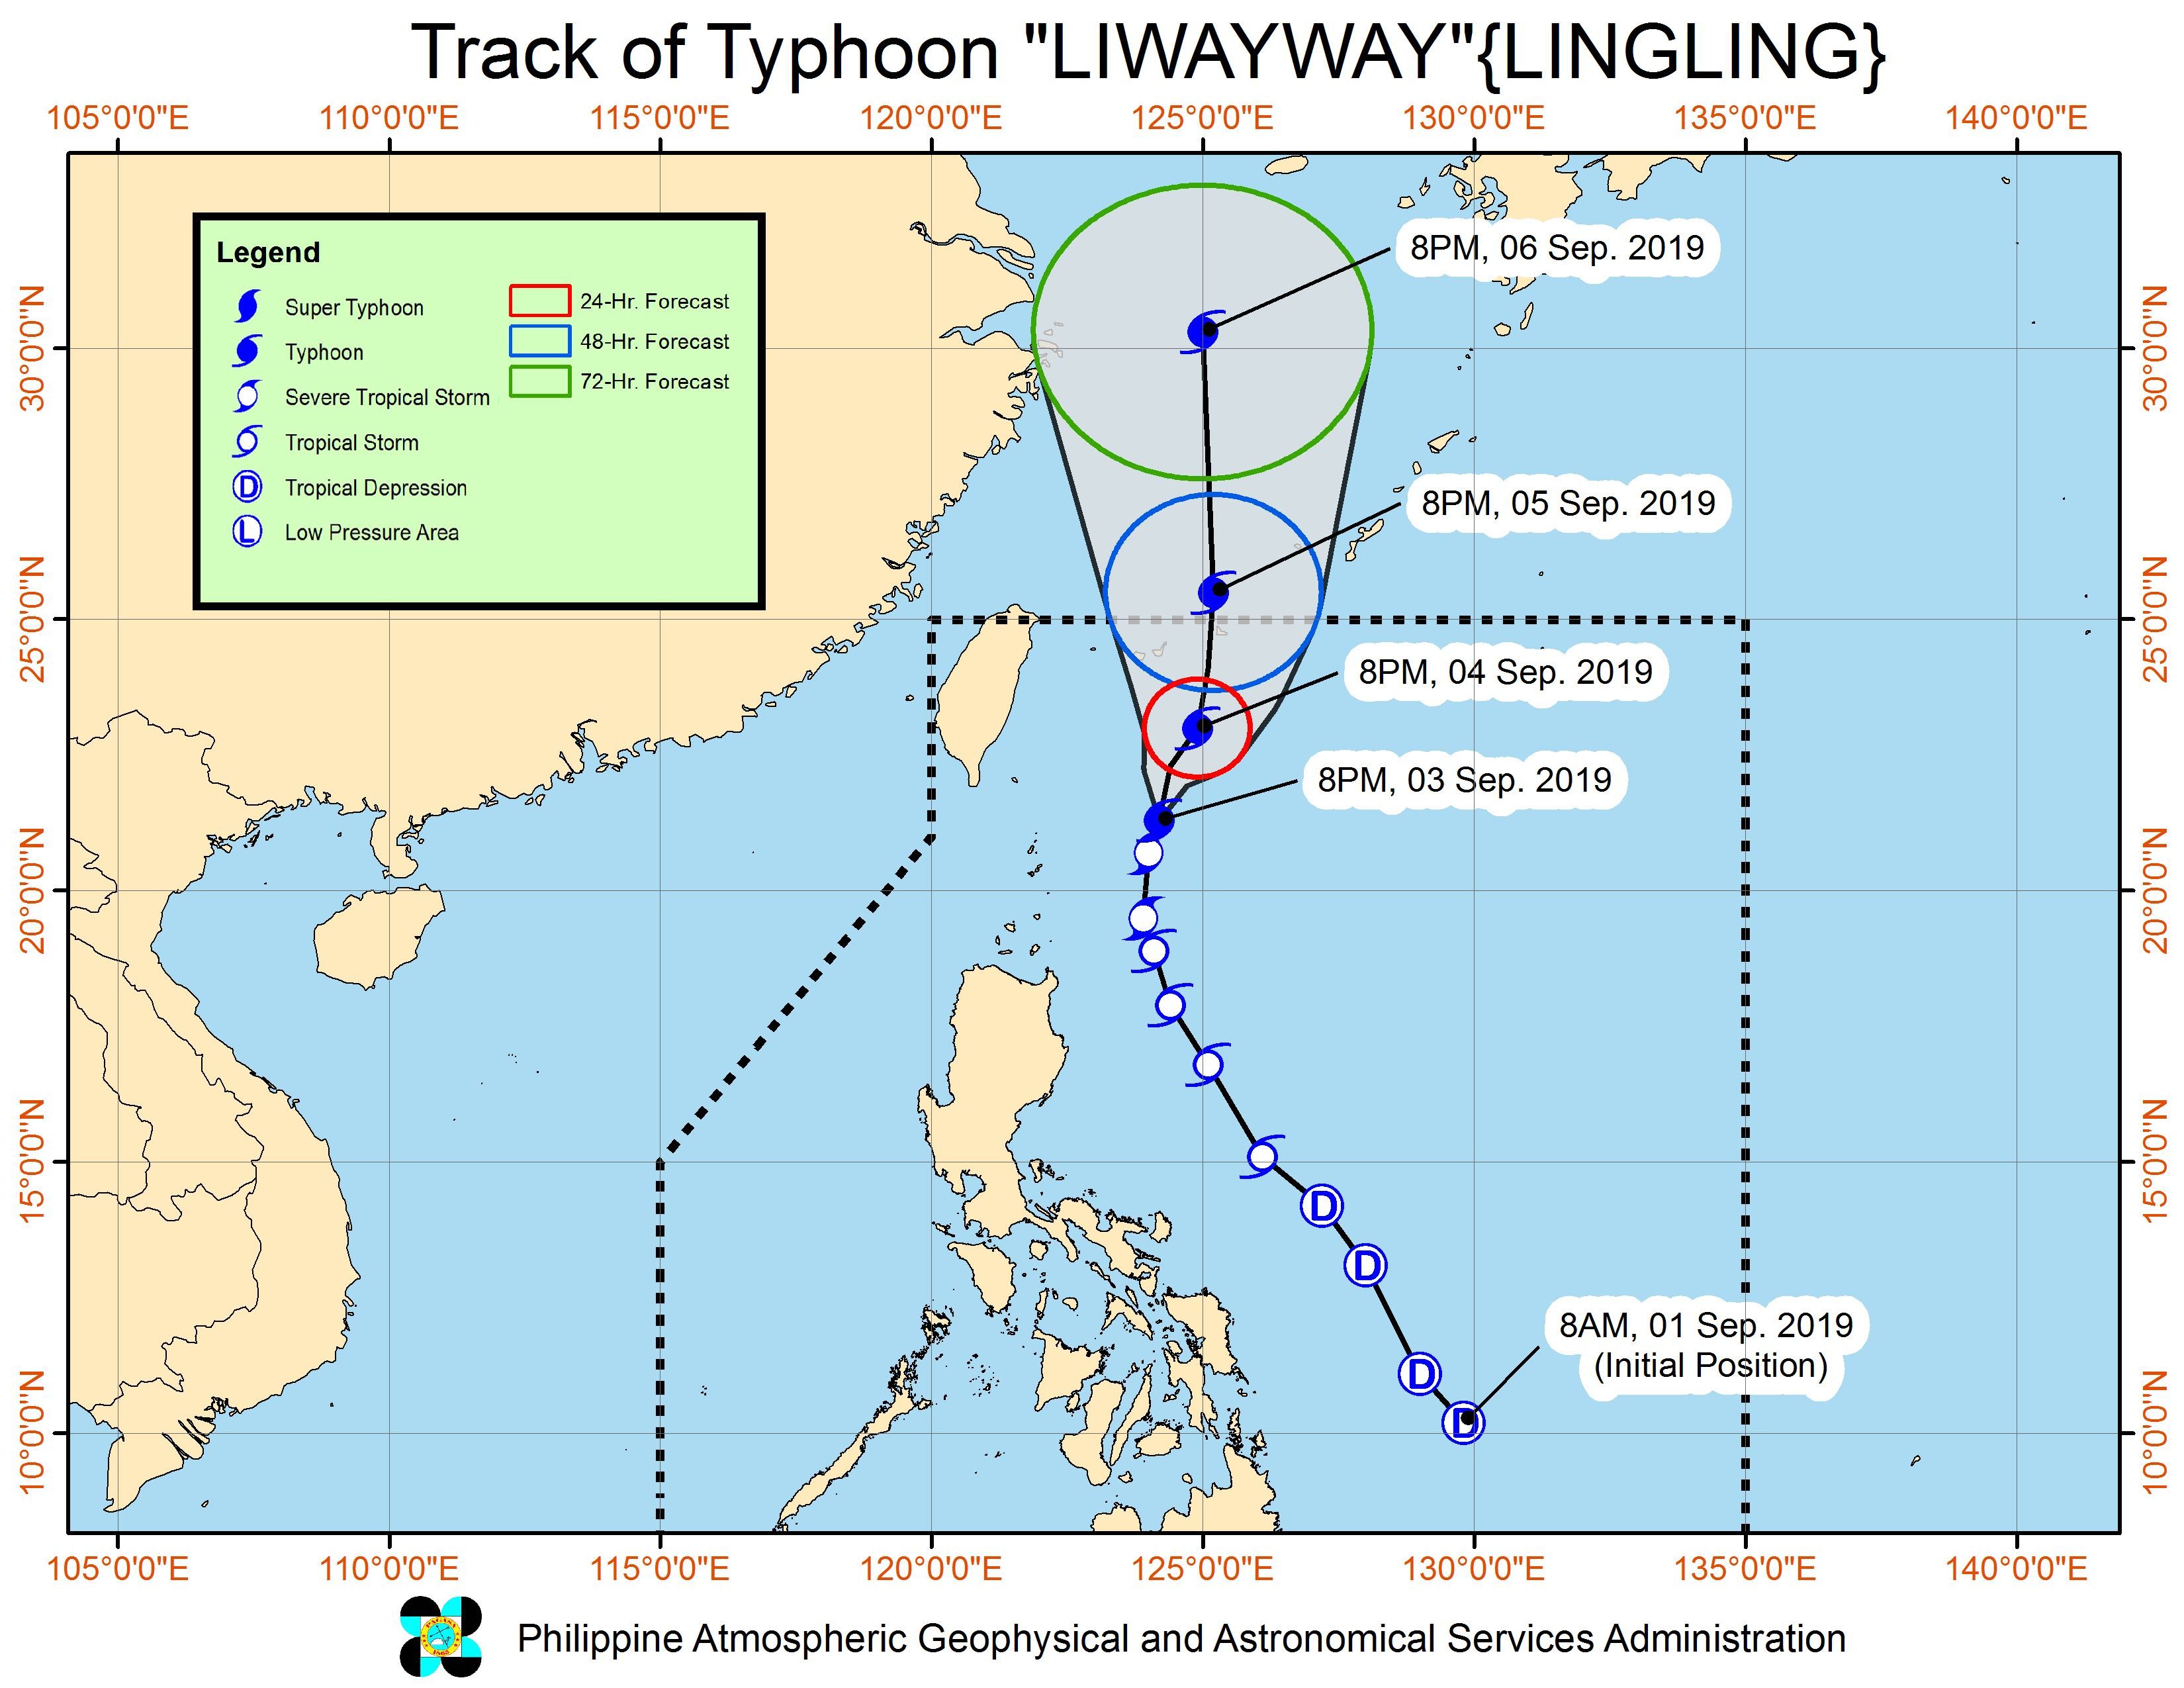 Forecast track of Typhoon Liwayway (Lingling) as of September 3, 2019, 11 pm. Image from PAGASA 